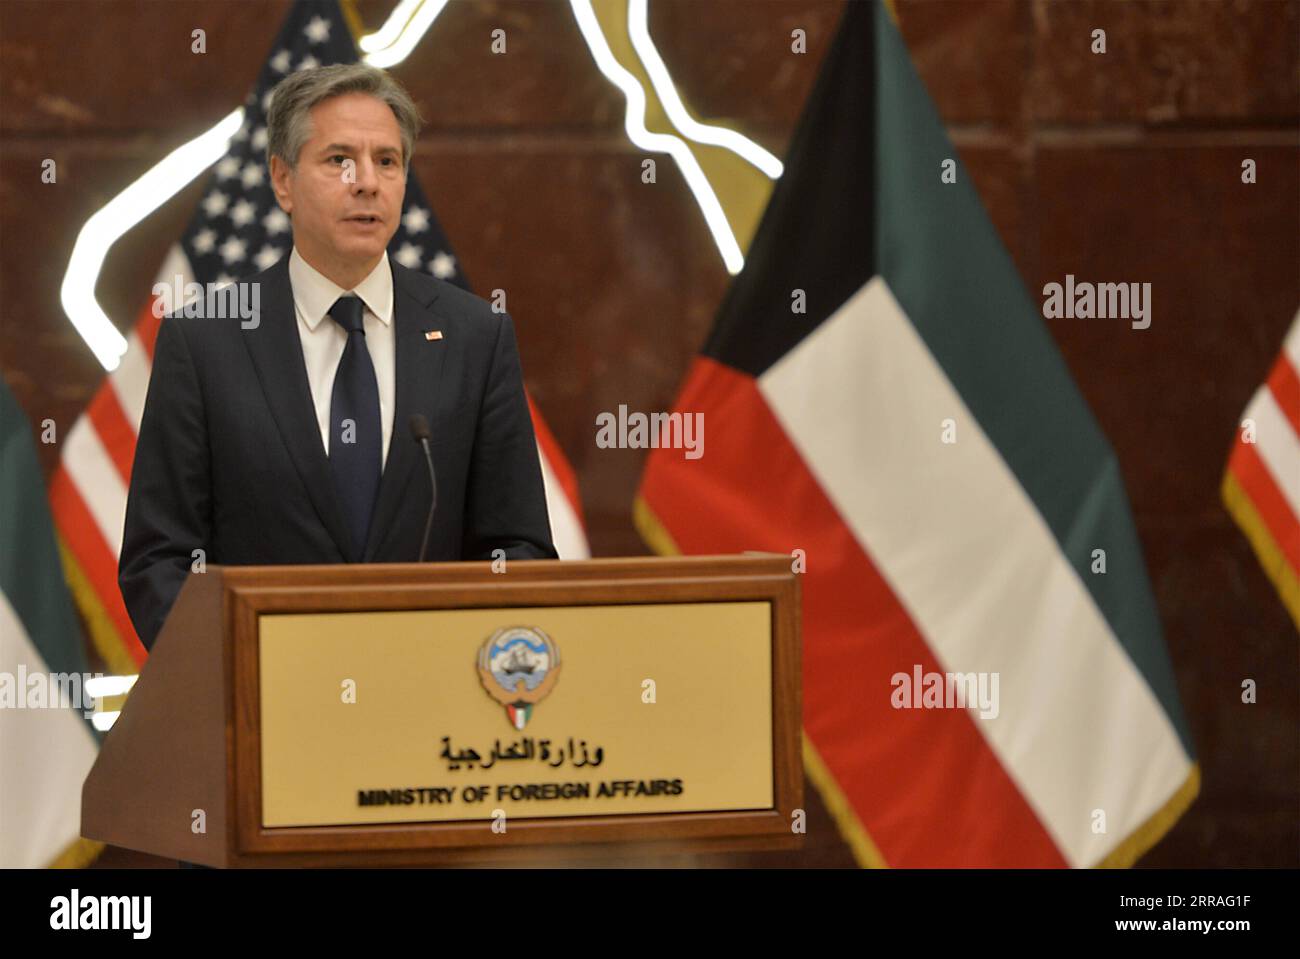 News Themen der Woche KW30 News Bilder des Tages 210729 -- KUWAIT CITY, July 29, 2021  -- U.S. Secretary of State Antony Blinken attends a press conference with Kuwaiti Foreign Minister Sheikh Ahmad Nasser Al-Mohammad Al-Sabah not seen in the picture in Kuwait City, Kuwait, July 29, 2021. Washington is fully prepared to continue negotiation with Iran to return to the Iranian nuclear agreement, visiting U.S. Secretary of State Antony Blinken said here on Thursday.  KUWAIT-KUWAIT CITY-U.S.-BLINKEN-VISIT xinhua PUBLICATIONxNOTxINxCHN Stock Photo